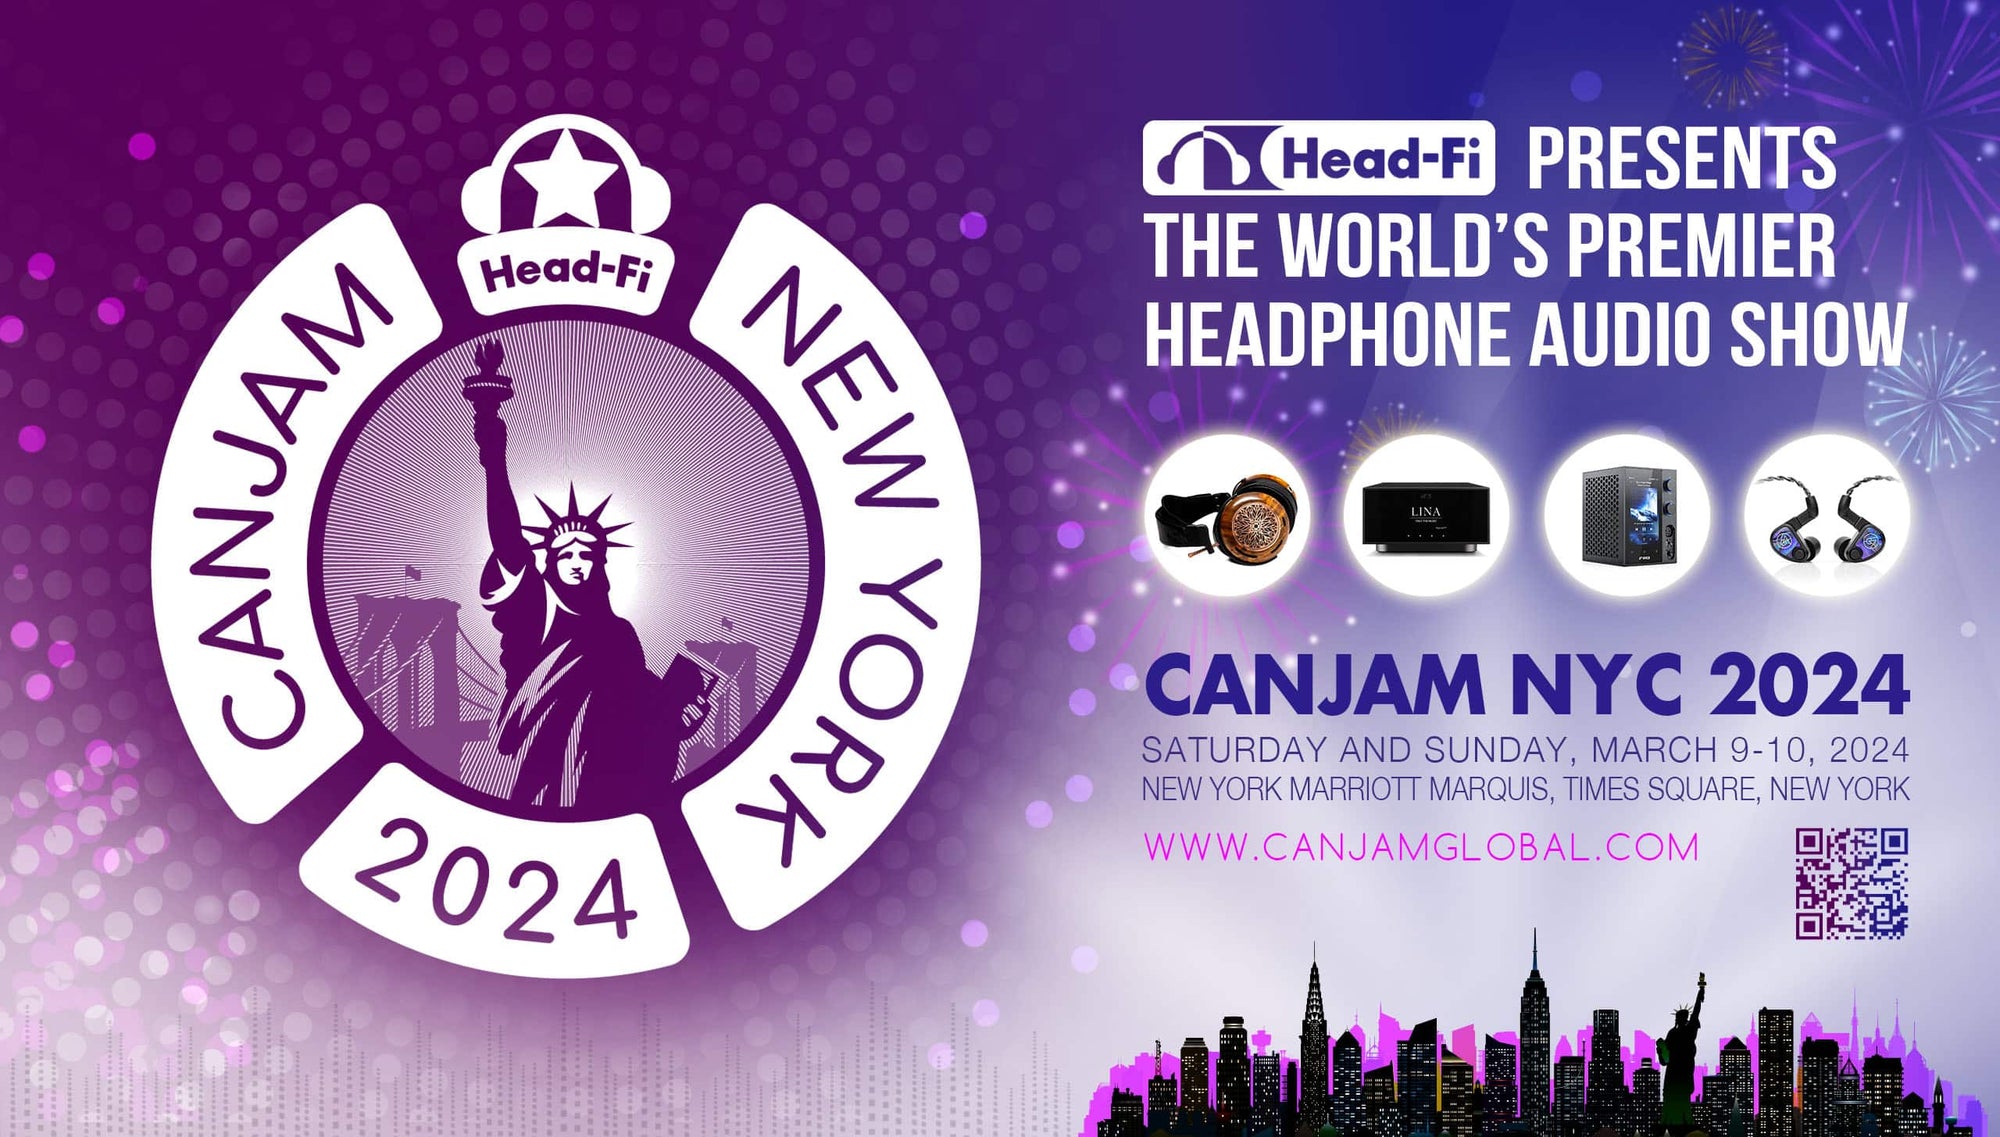 CANJAM NYC 2024 Logo, March 9-10, 2024